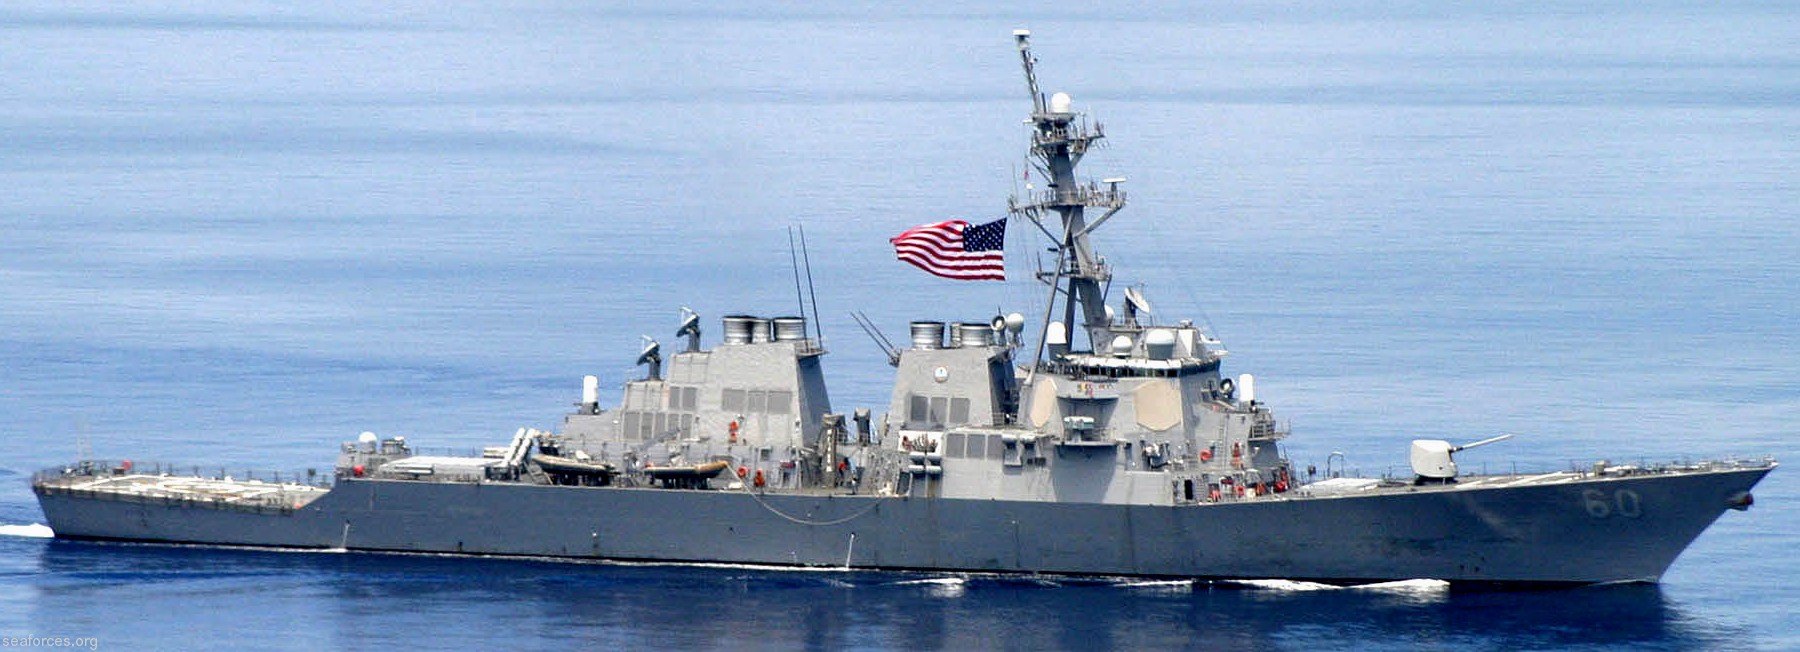 ddg-60 uss paul hamilton guided missile destroyer us navy 39